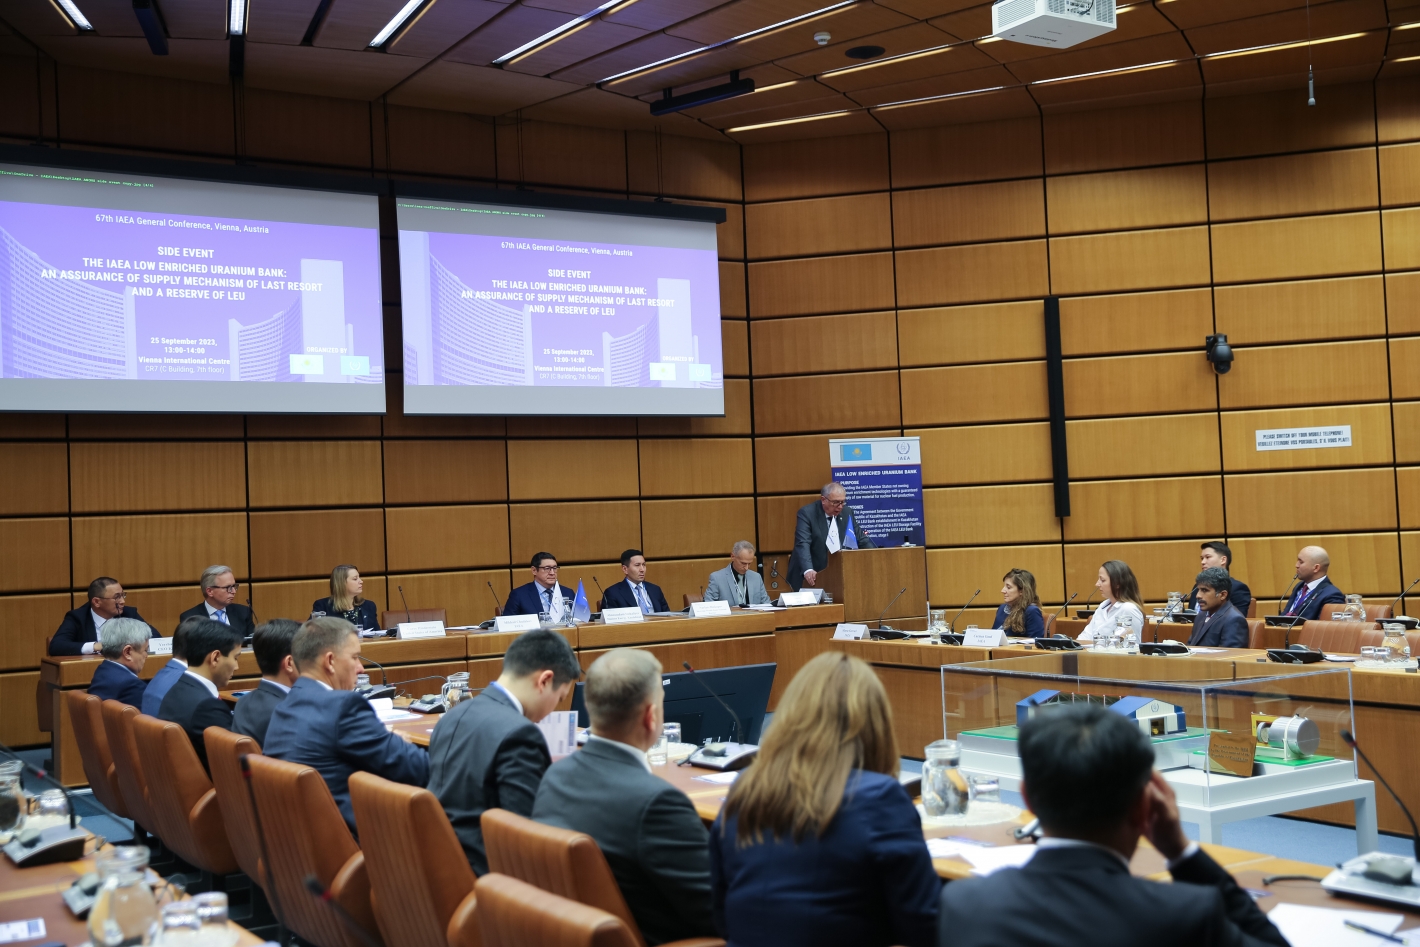 Kazatomprom is participating in the IAEA General Conference